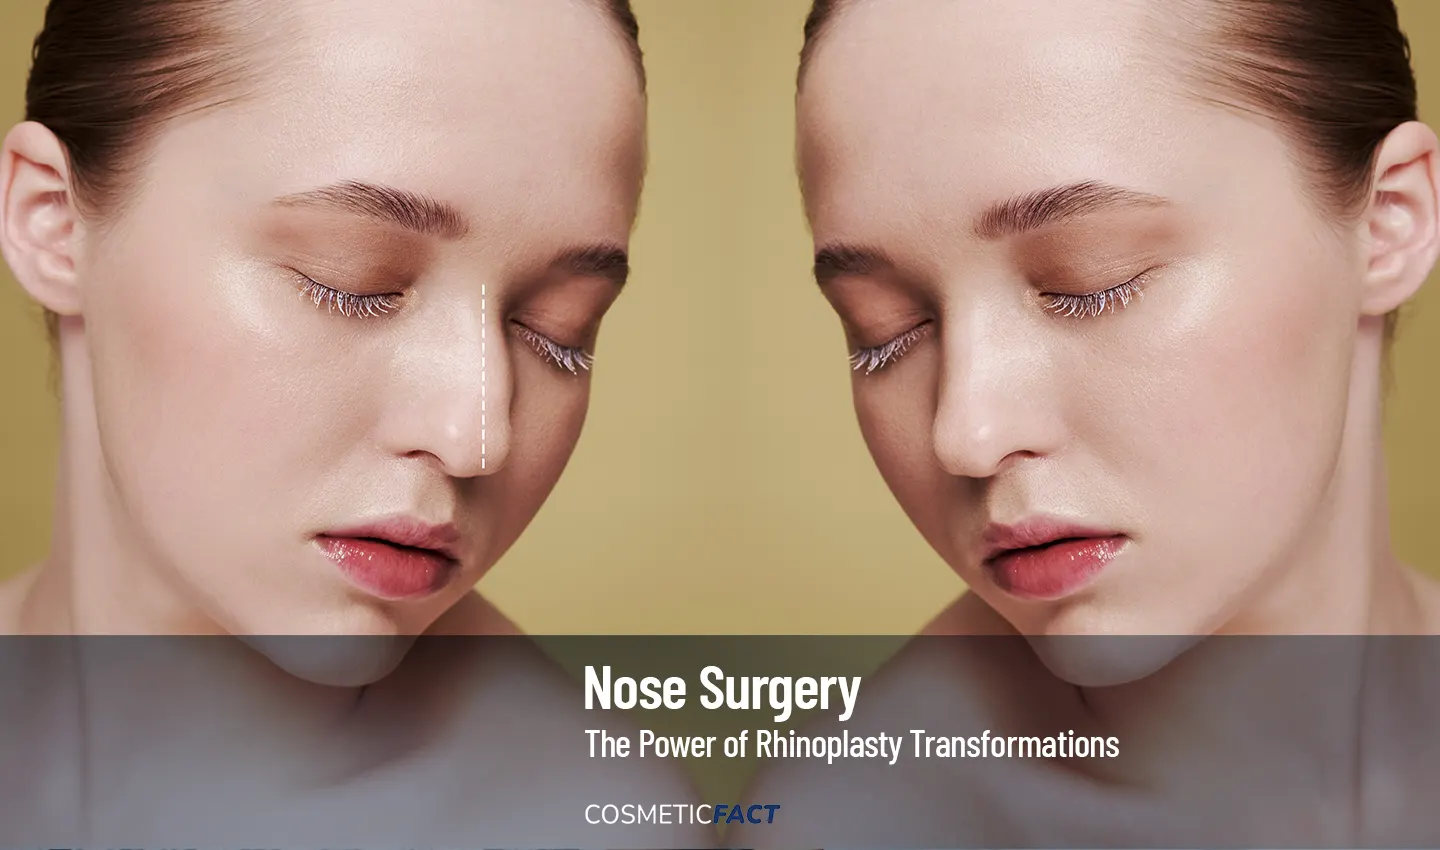 Before and after photo of a woman's nose reshaping transformation, showcasing the powerful impact of rhinoplasty on appearance and confidence